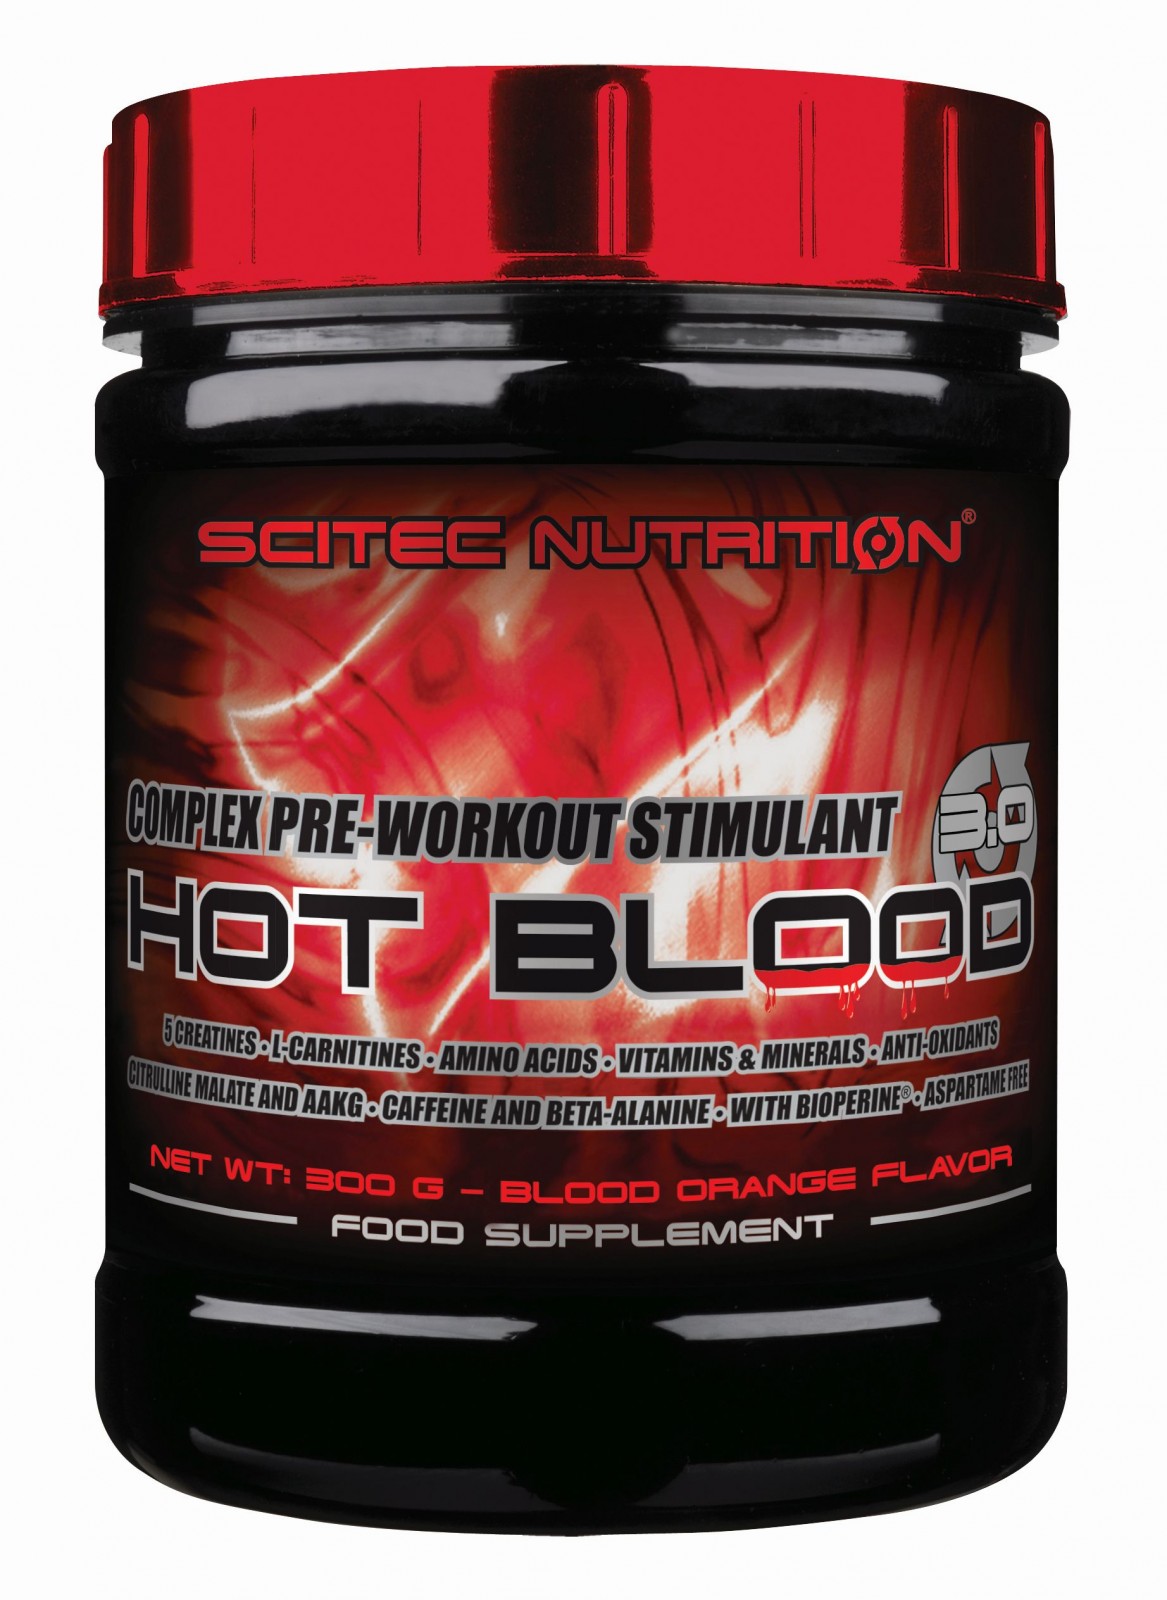 5 Day Blood pre workout for Burn Fat fast